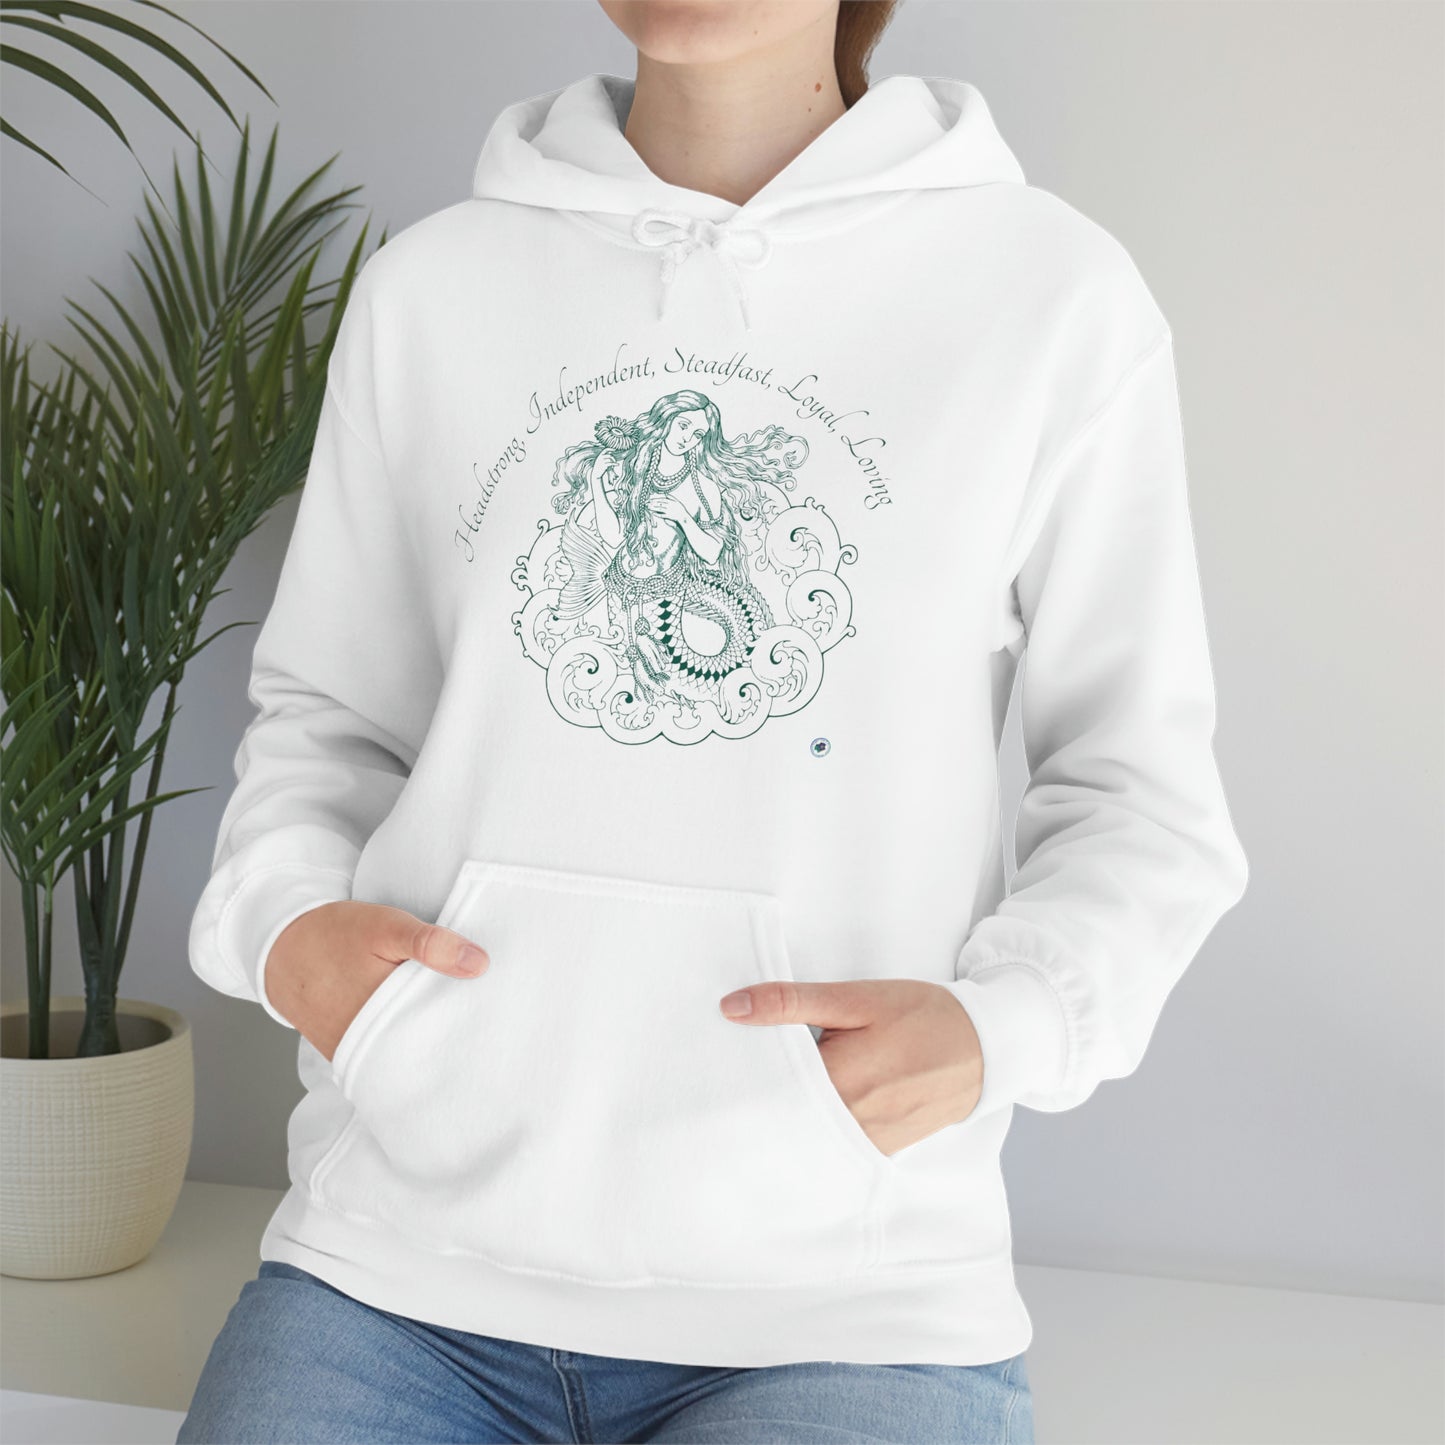 ‘Headstrong, independent, steadfast, loyal, loving’ Printed Front & Back.  Unisex Heavy Blend™ Hooded Sweatshirt